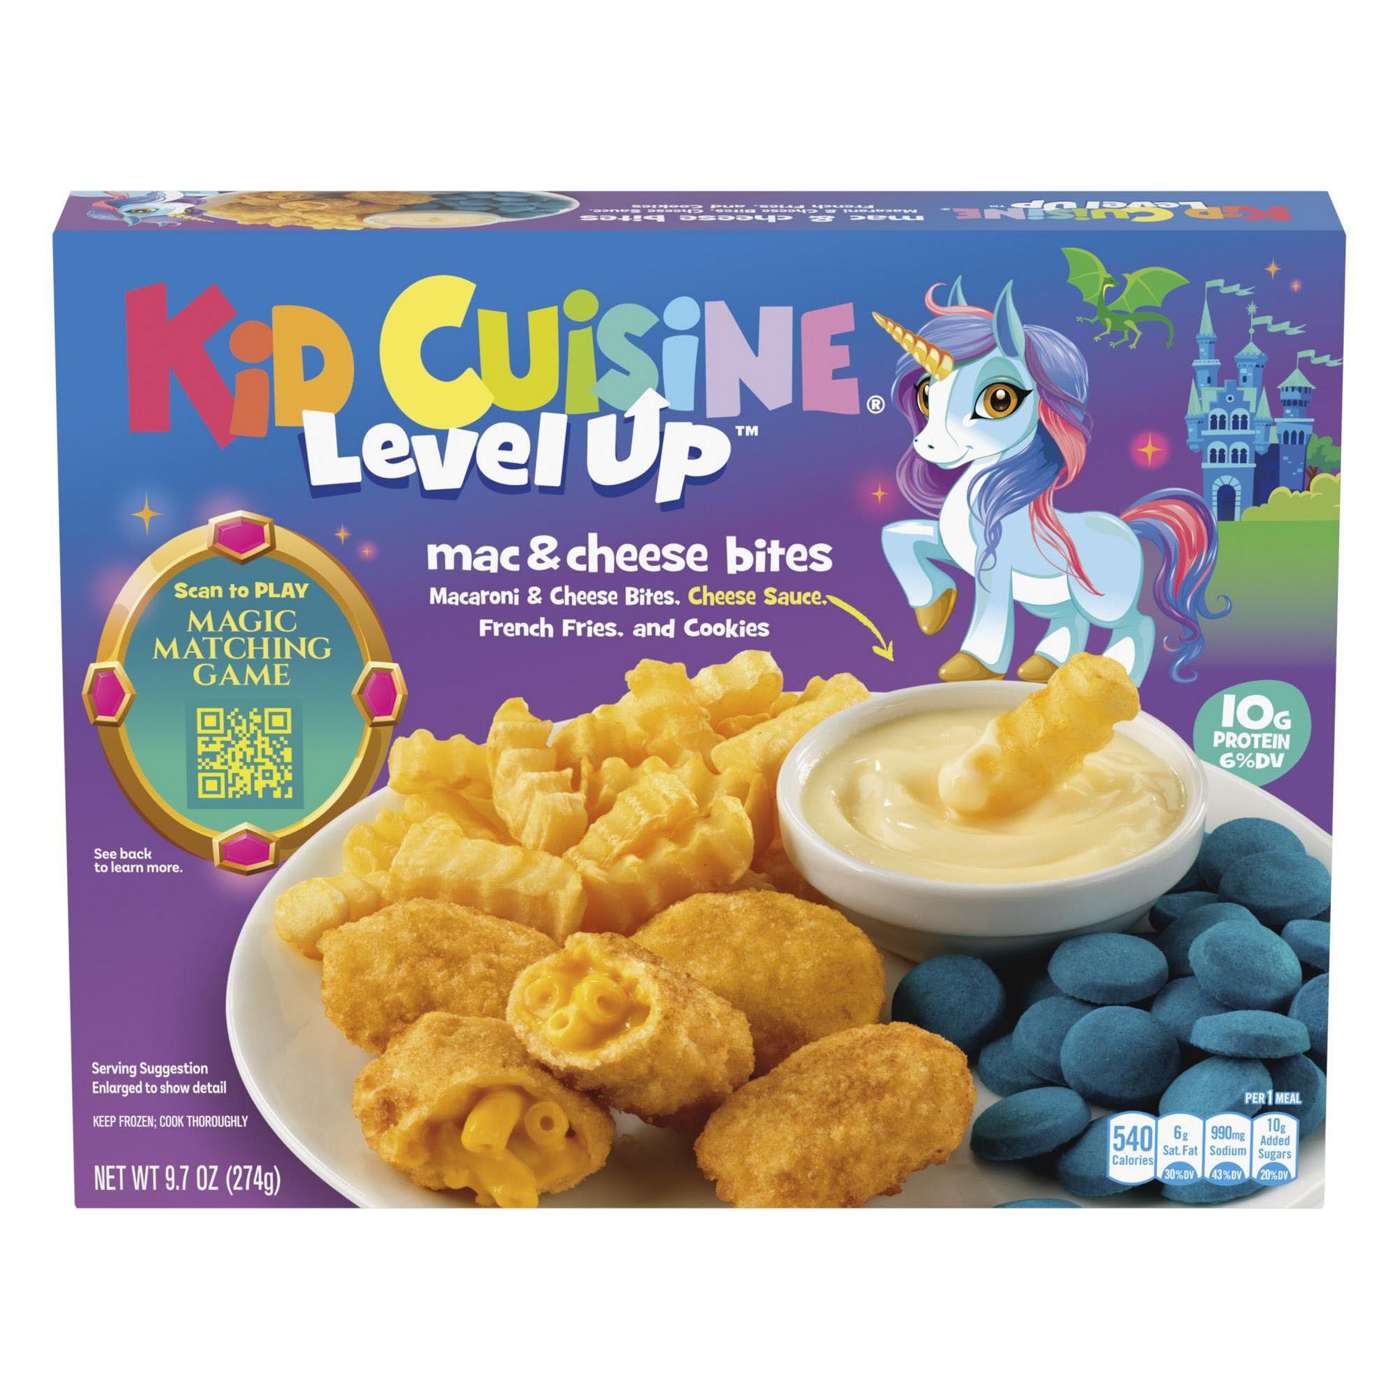 Kid Cuisine Level Up Mac & Cheese Bites Frozen Meal; image 1 of 4